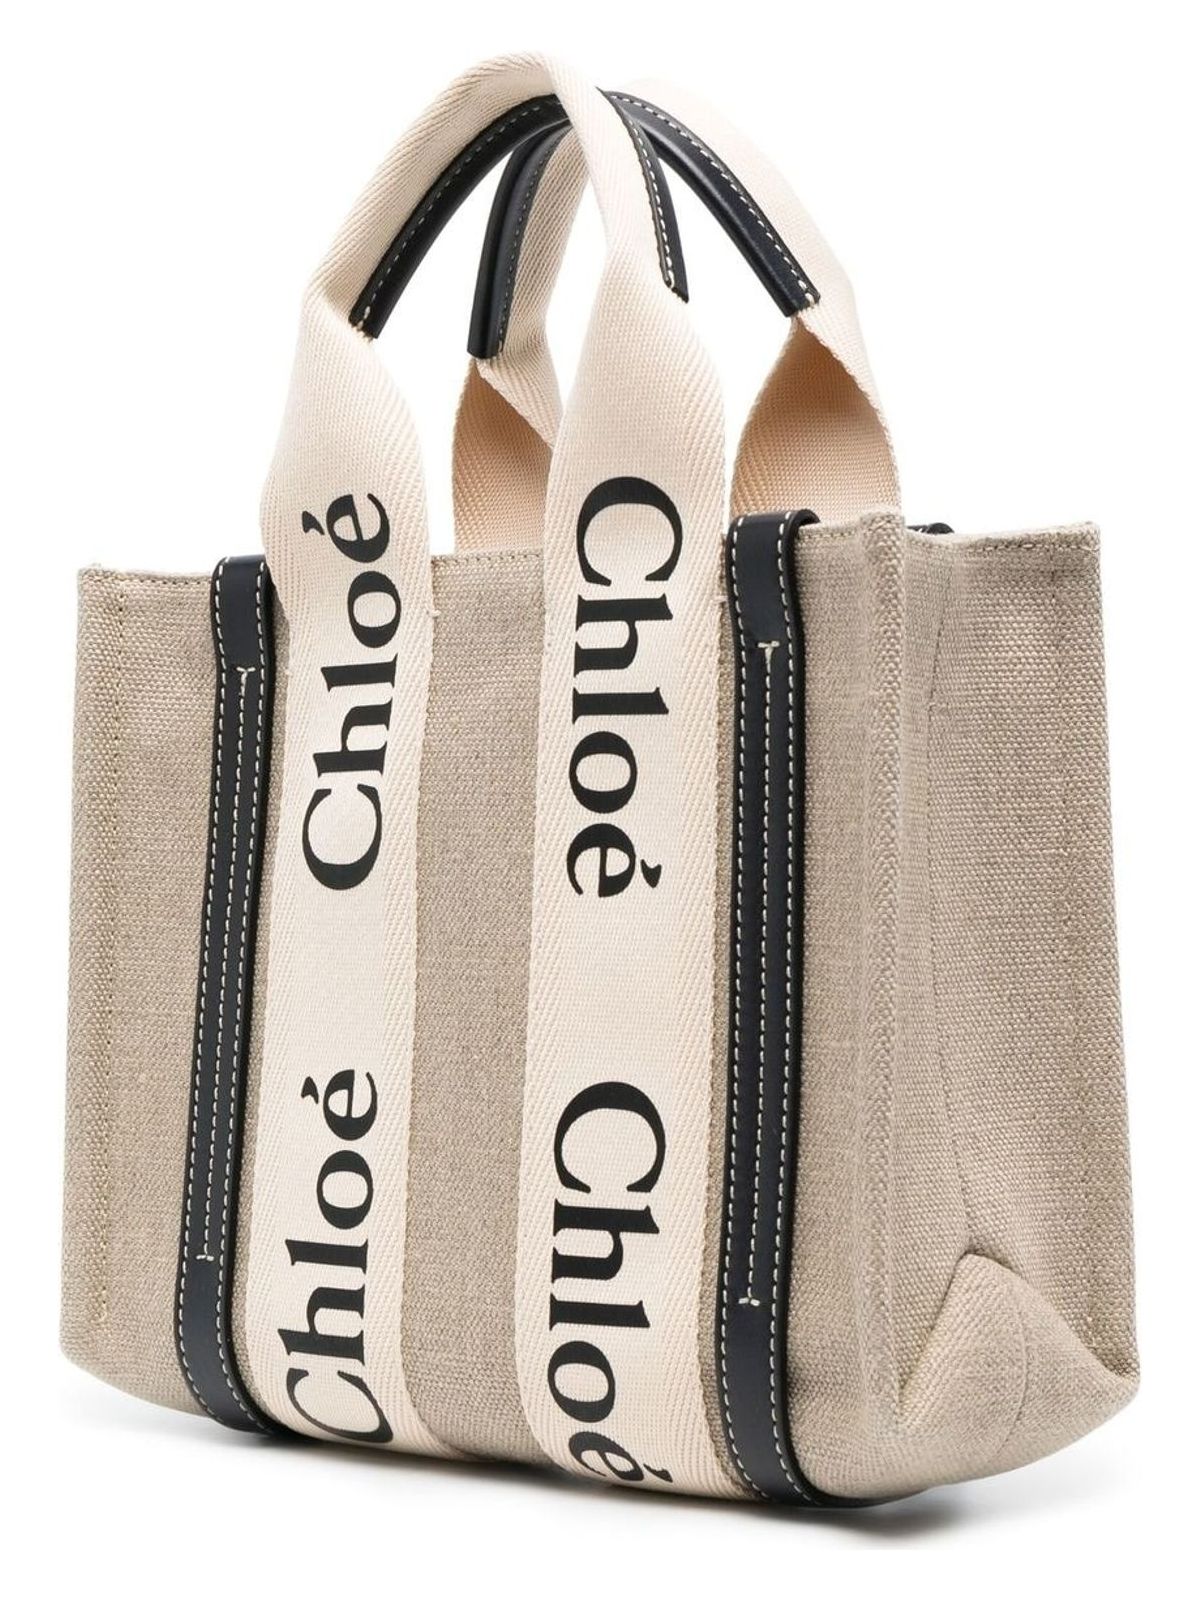 WOODY91J CHLOÉ WOODY CANVAS AND LEATHER TOTE BAG